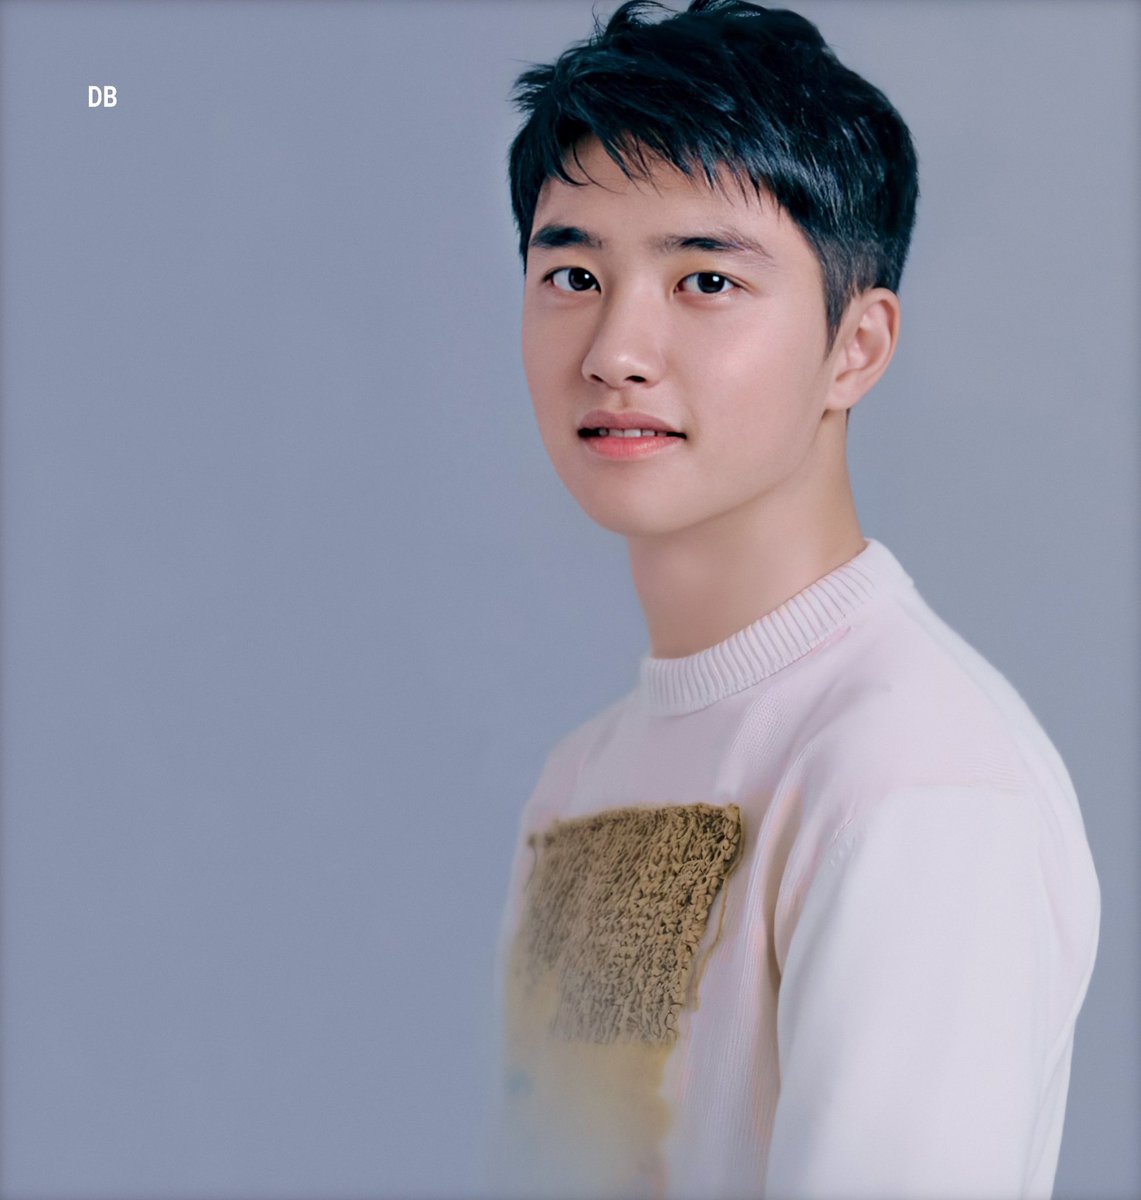 *•.¸♡ 𝐃-𝟒𝟔𝟖 ♡¸.•*I found my new favorite photos of you... it really made me miss you more. Come back happy and healthy, okay?   #도경수  #디오  @weareoneEXO